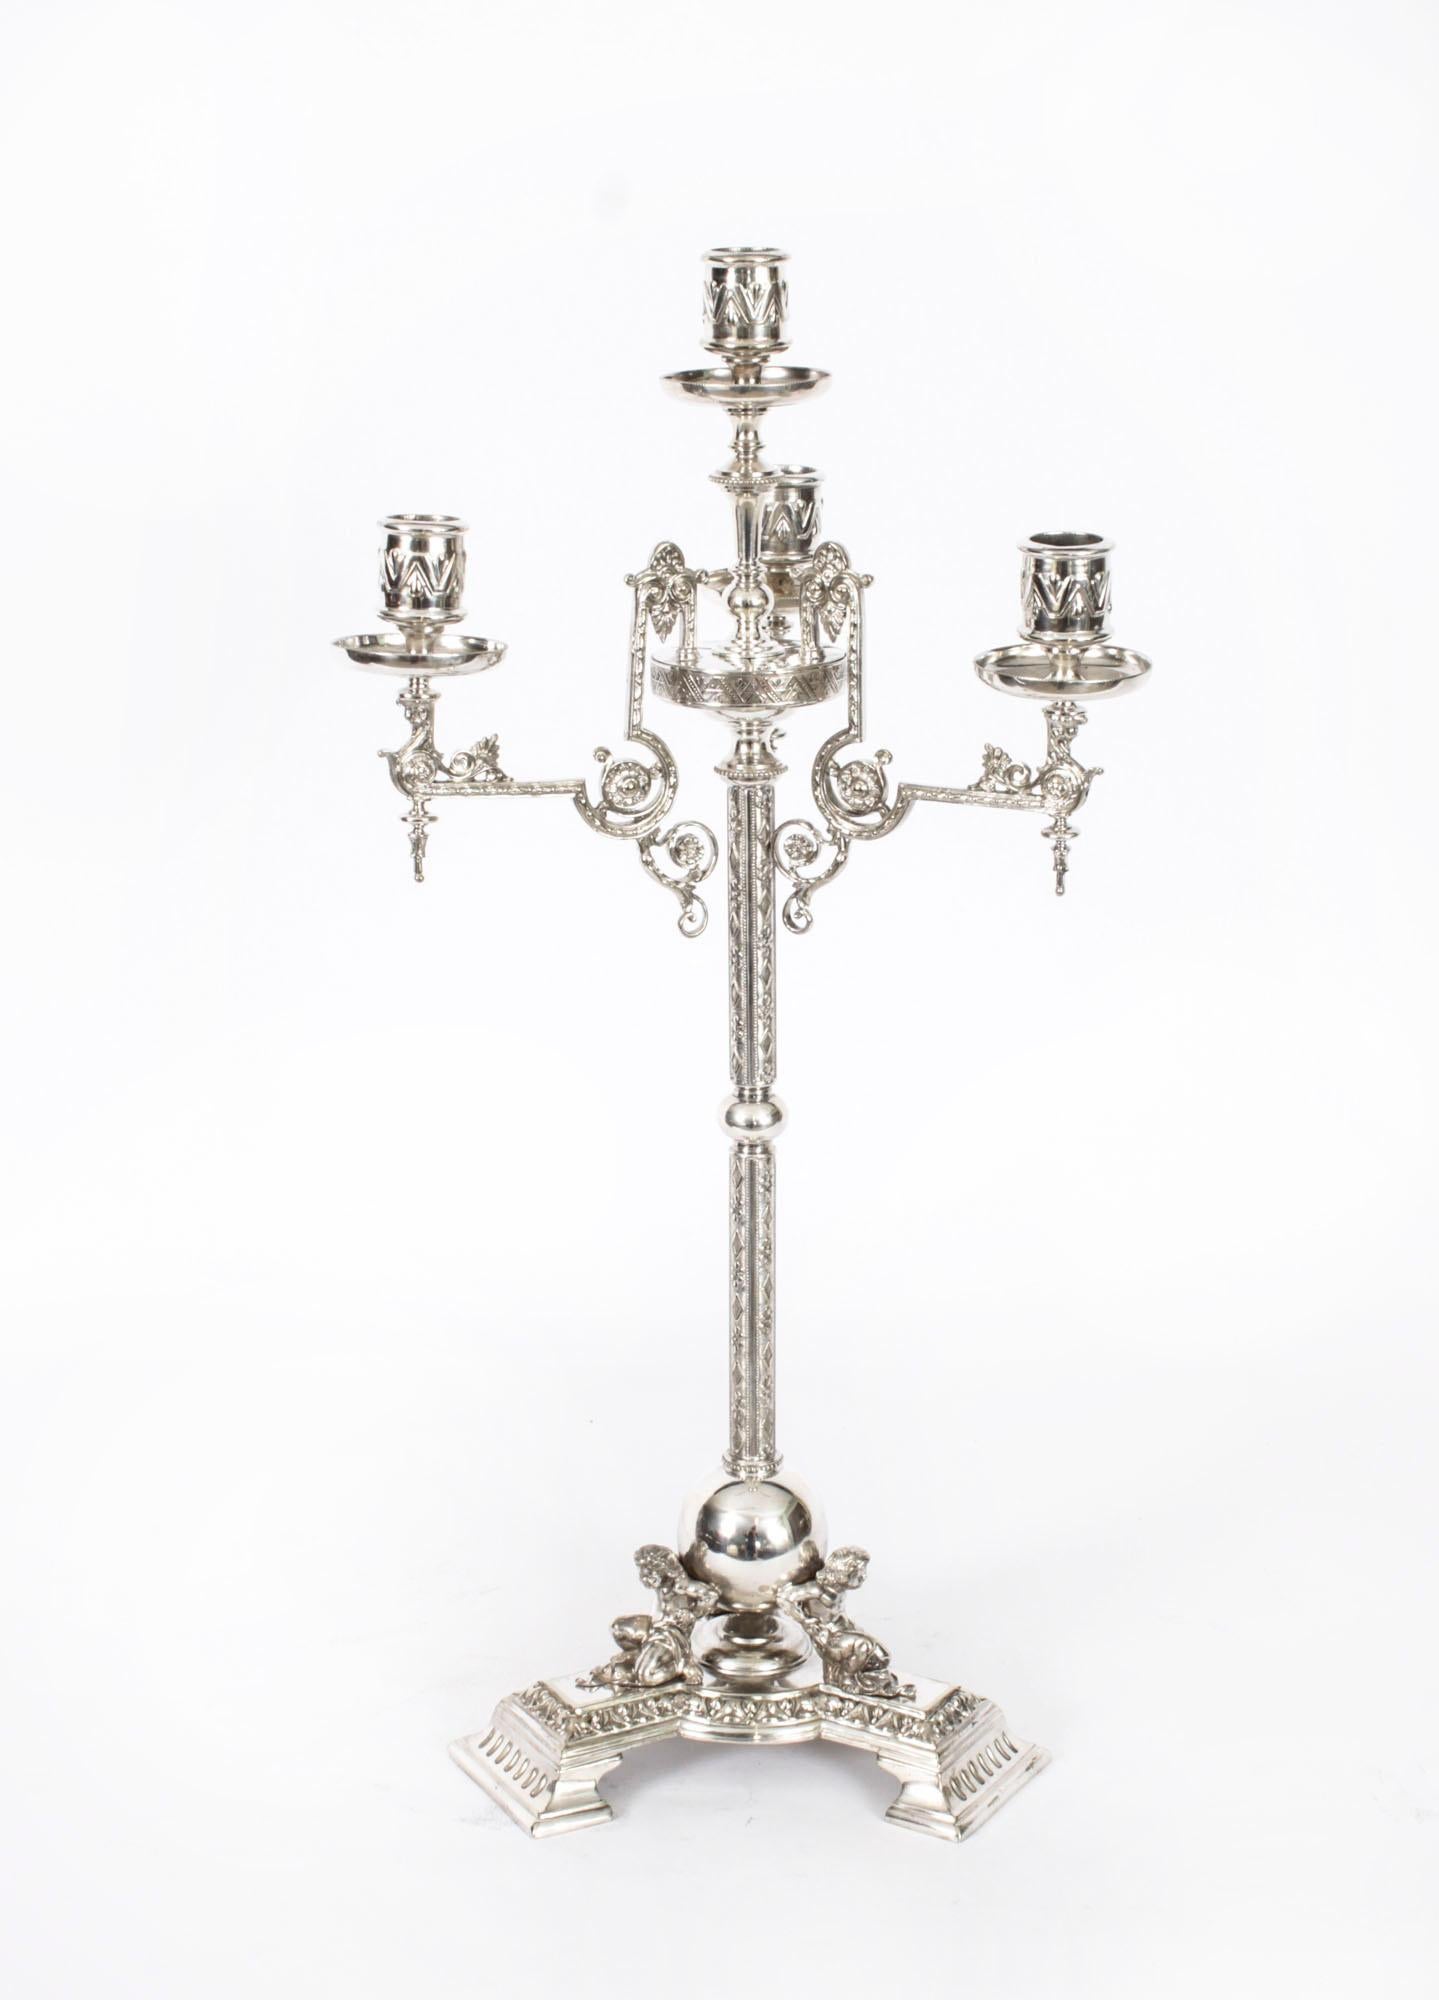 This is a stunning pair of English antique Neo Classical design Victorian silver plated, five light, four-branch table candelabra, circa 1880 in date, and each bearing the makers mark of the renowned English silversmiths James Dixon and  sons.

The